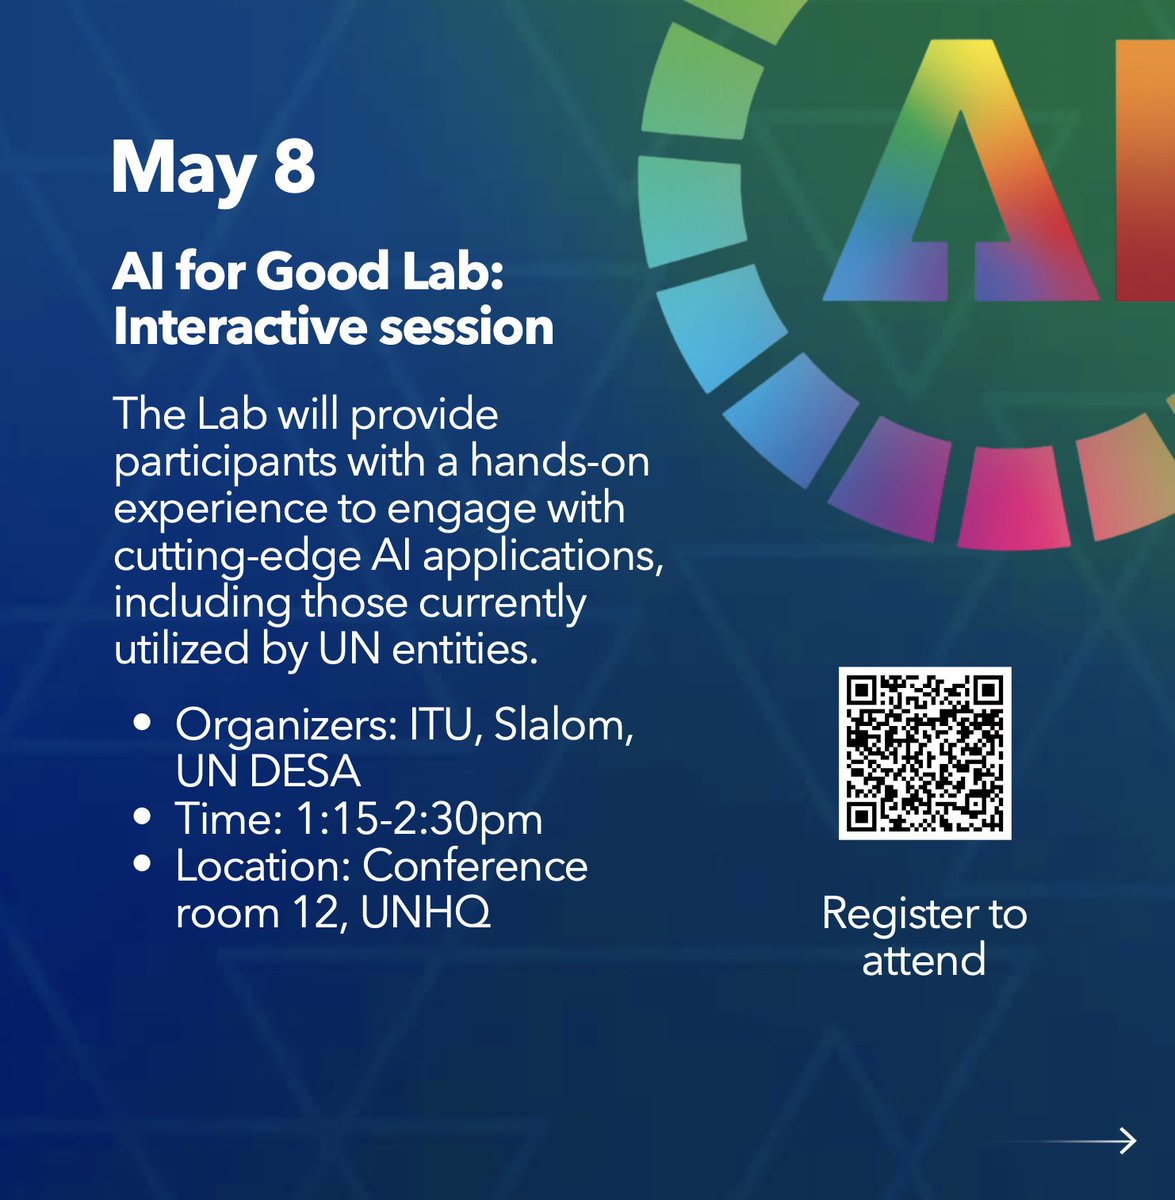 How does #AI drive progress on the #SDGs? 🤔

Join the @AIforGood Lab INTERACTIVE session happening today at the UNHQ and engage with some amazing AI applications.

REGISTER here: bit.ly/4dp7wi1

#Tech4SDGs @ITU @Slalom @UNDESA